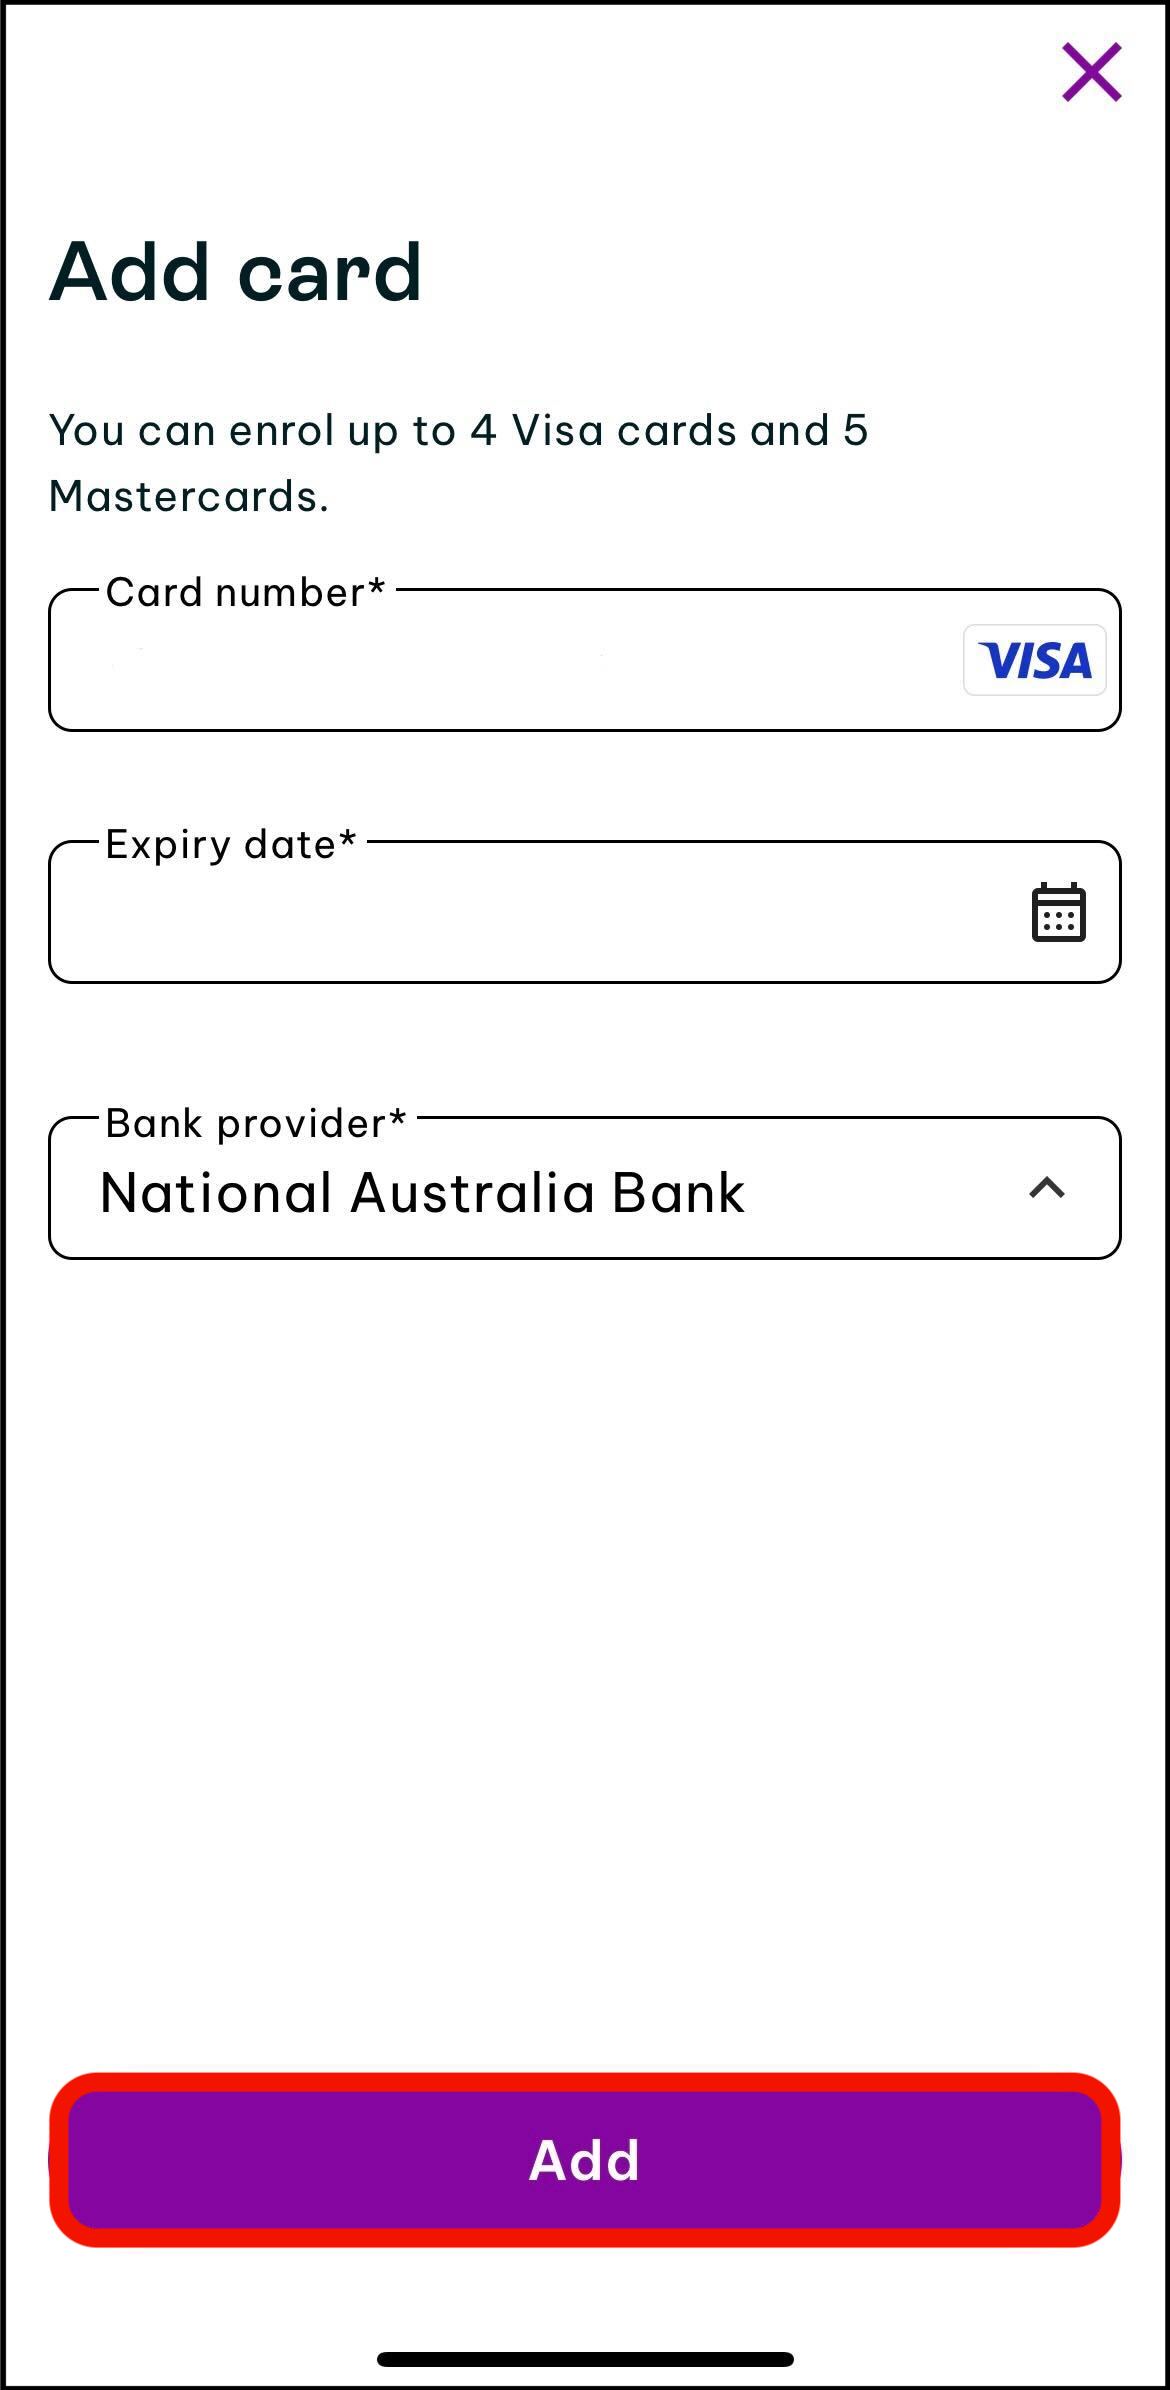 Screenshot of add card screen in benefits highlighting where to tap on add to enrol new card for cashback